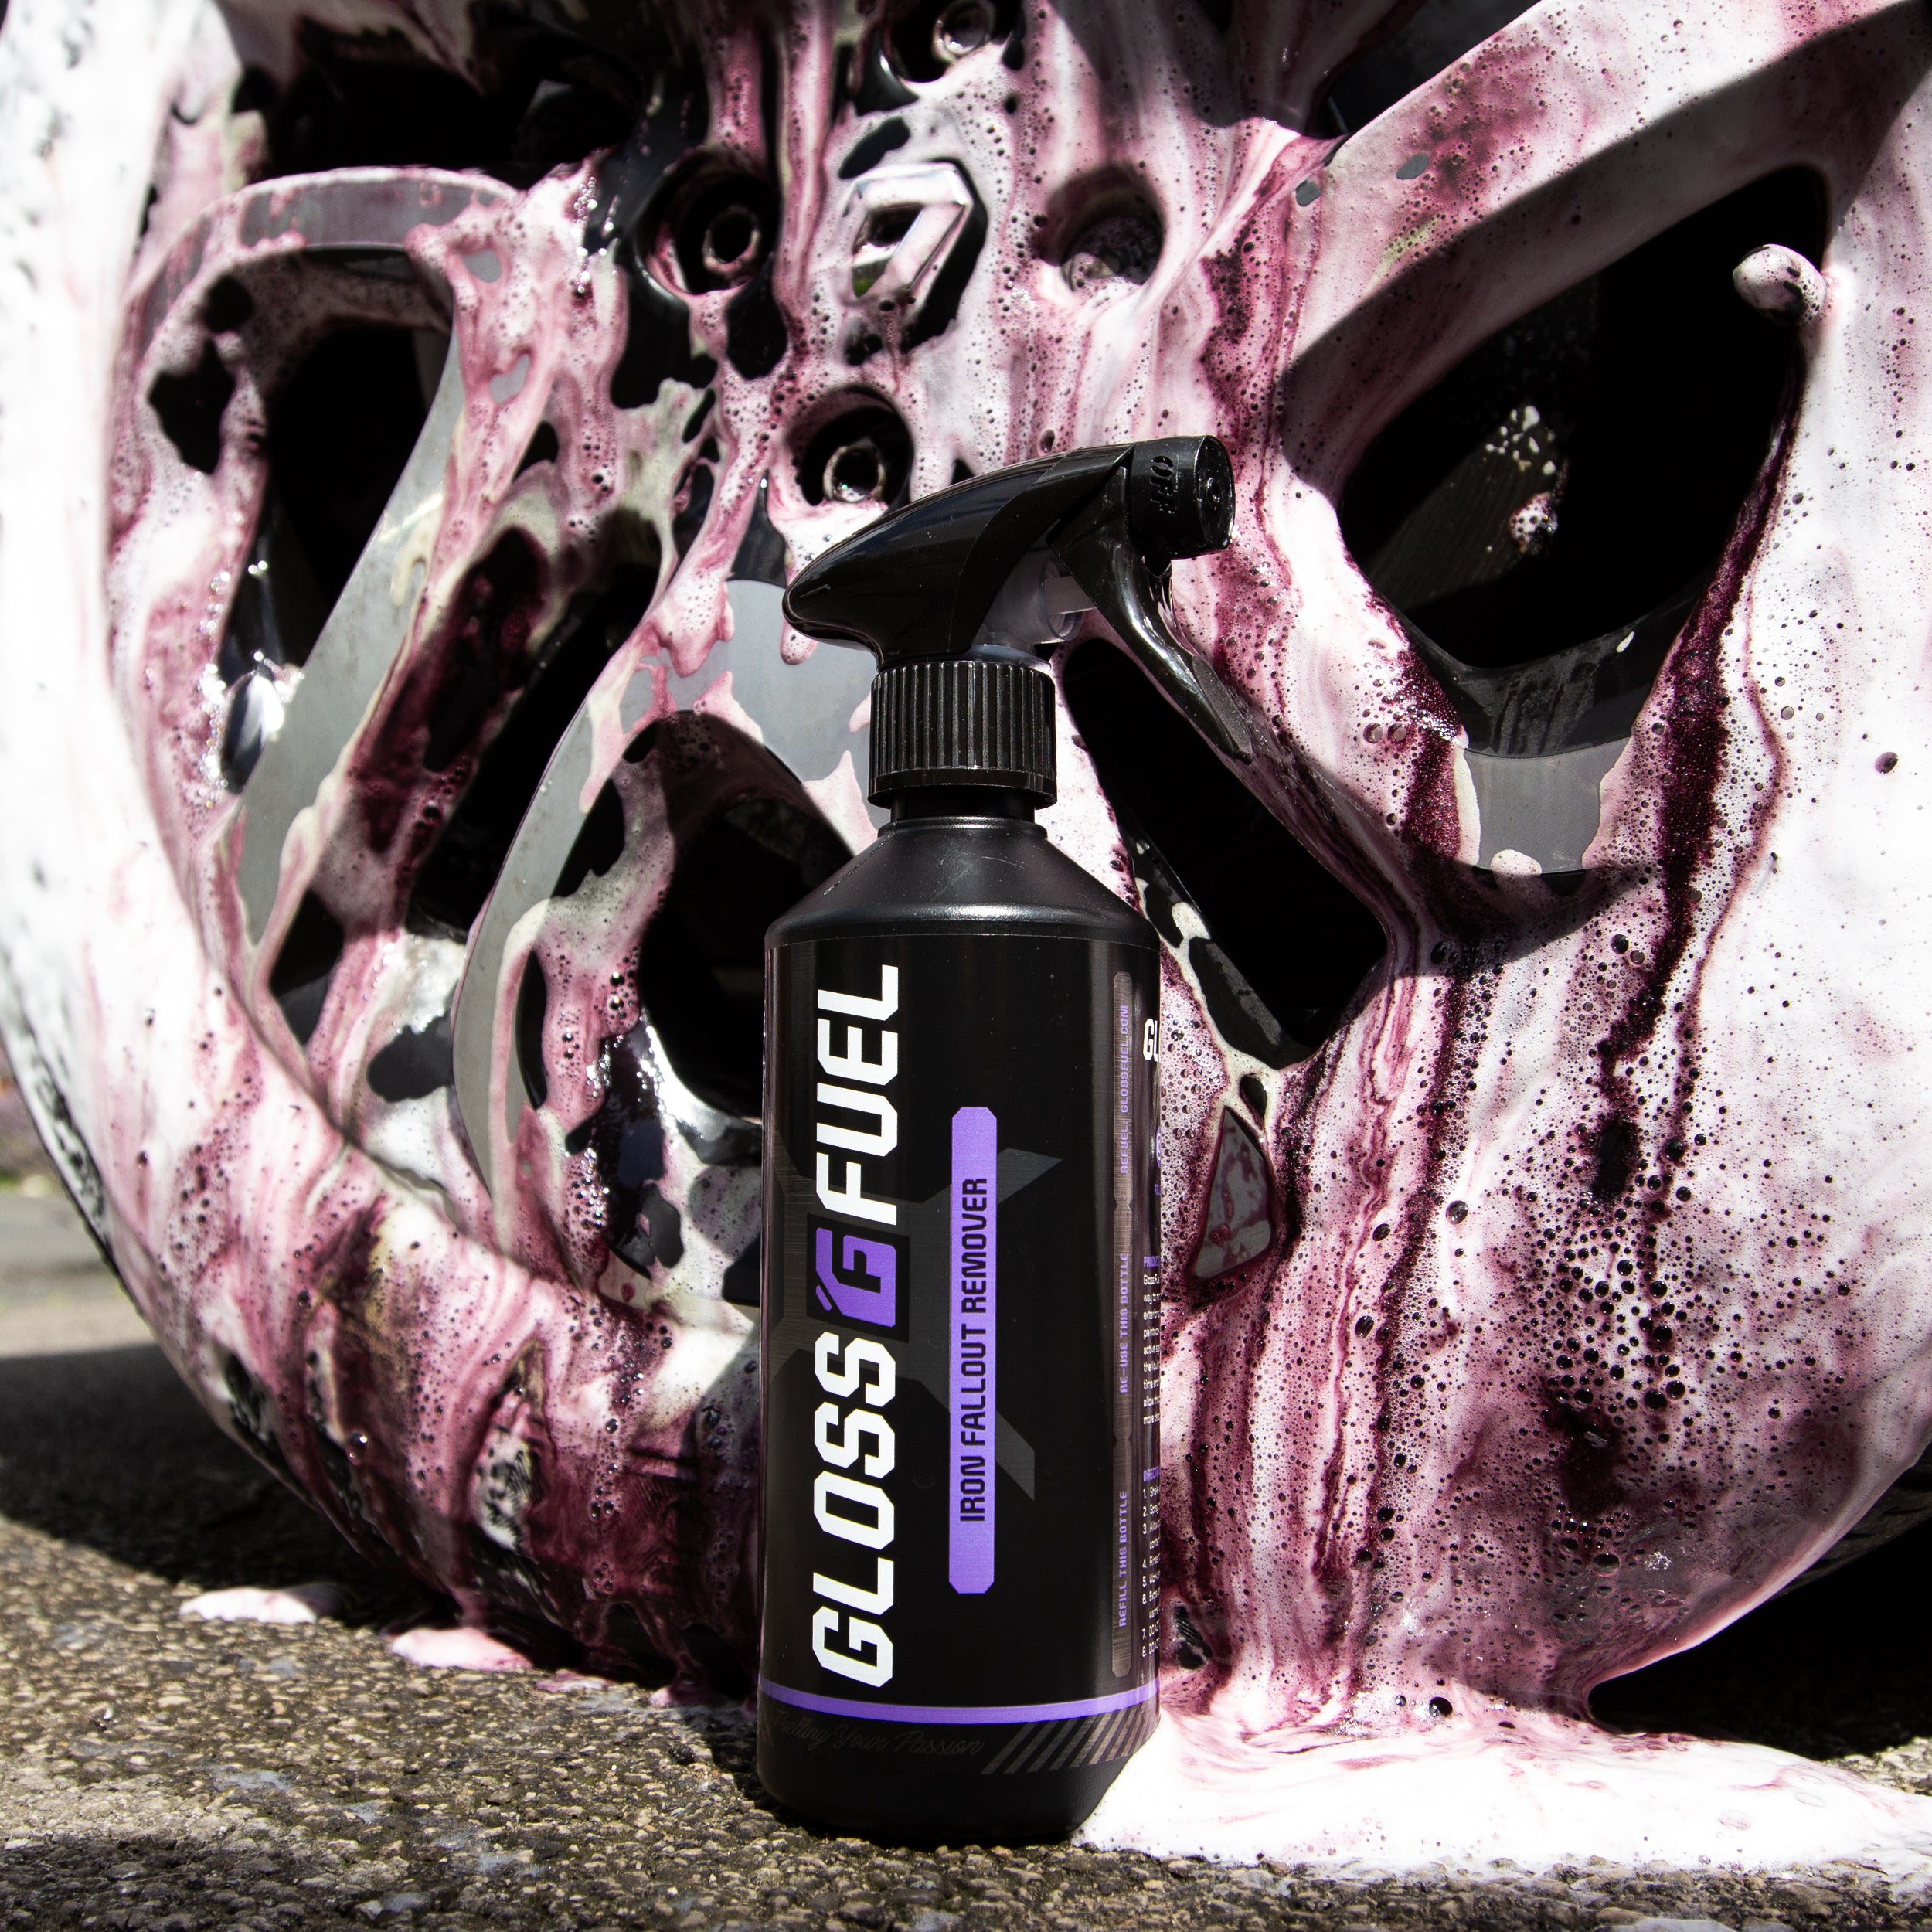 Gloss Fuel Iron Fallout Remover Trigger Spray Bottle Cleaning a Dirty Renault Alloy Wheel